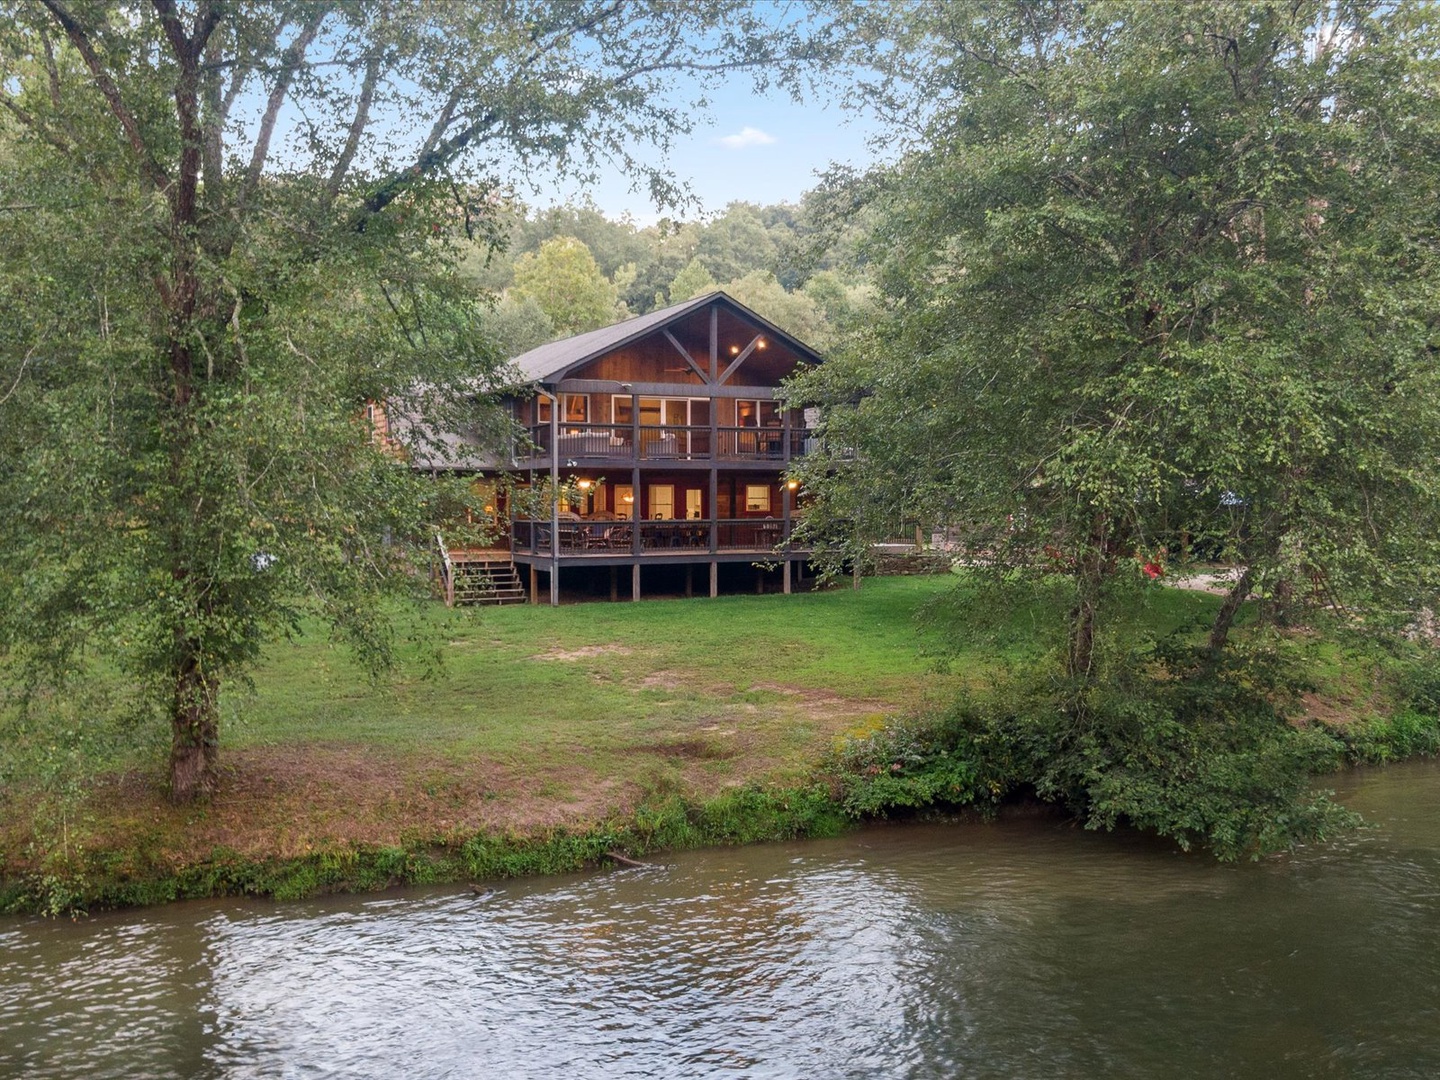 The River House - Cabin Rental on Toccoa River and Hothouse Creek